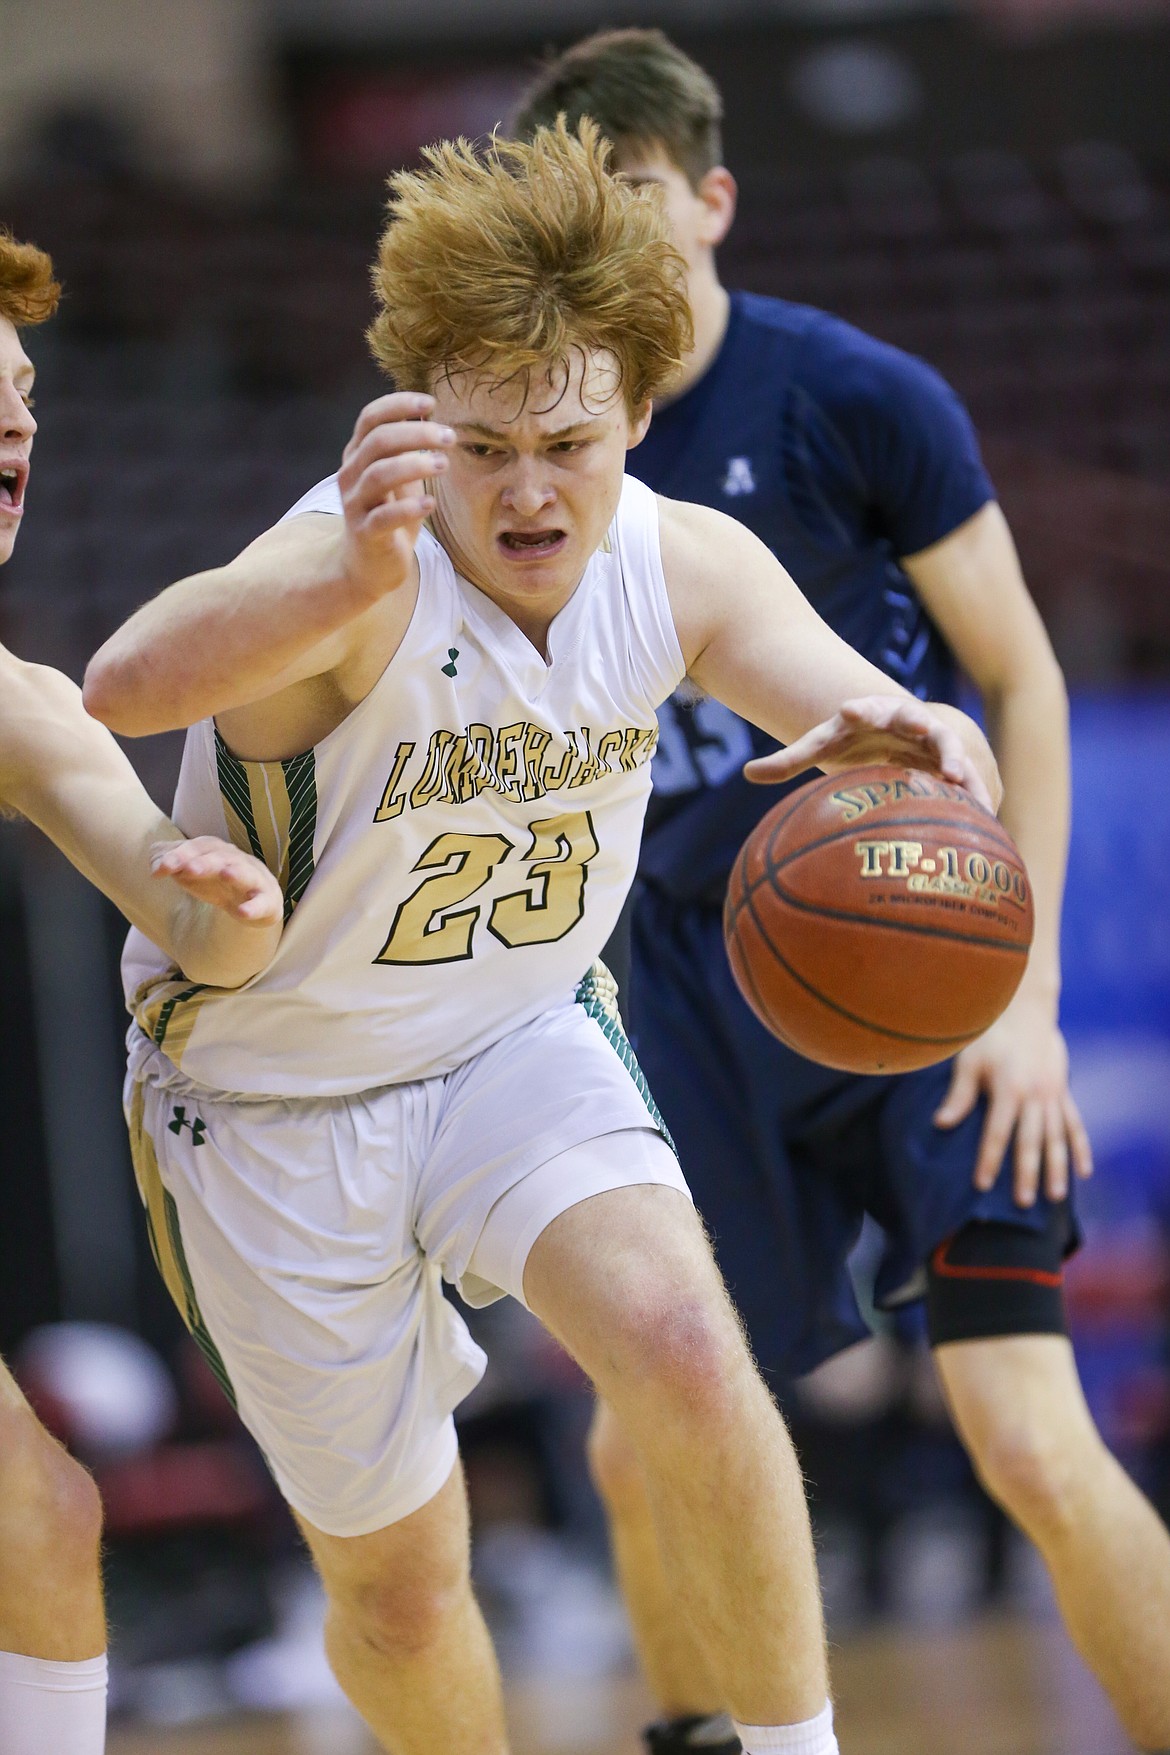 JASON DUCHOW PHOTOGRAPHY
St. Maries senior guard Eli Gibson drives down the court during the state 2A boys basketball championship game at the Ford Idaho Center in Nampa on Saturday.